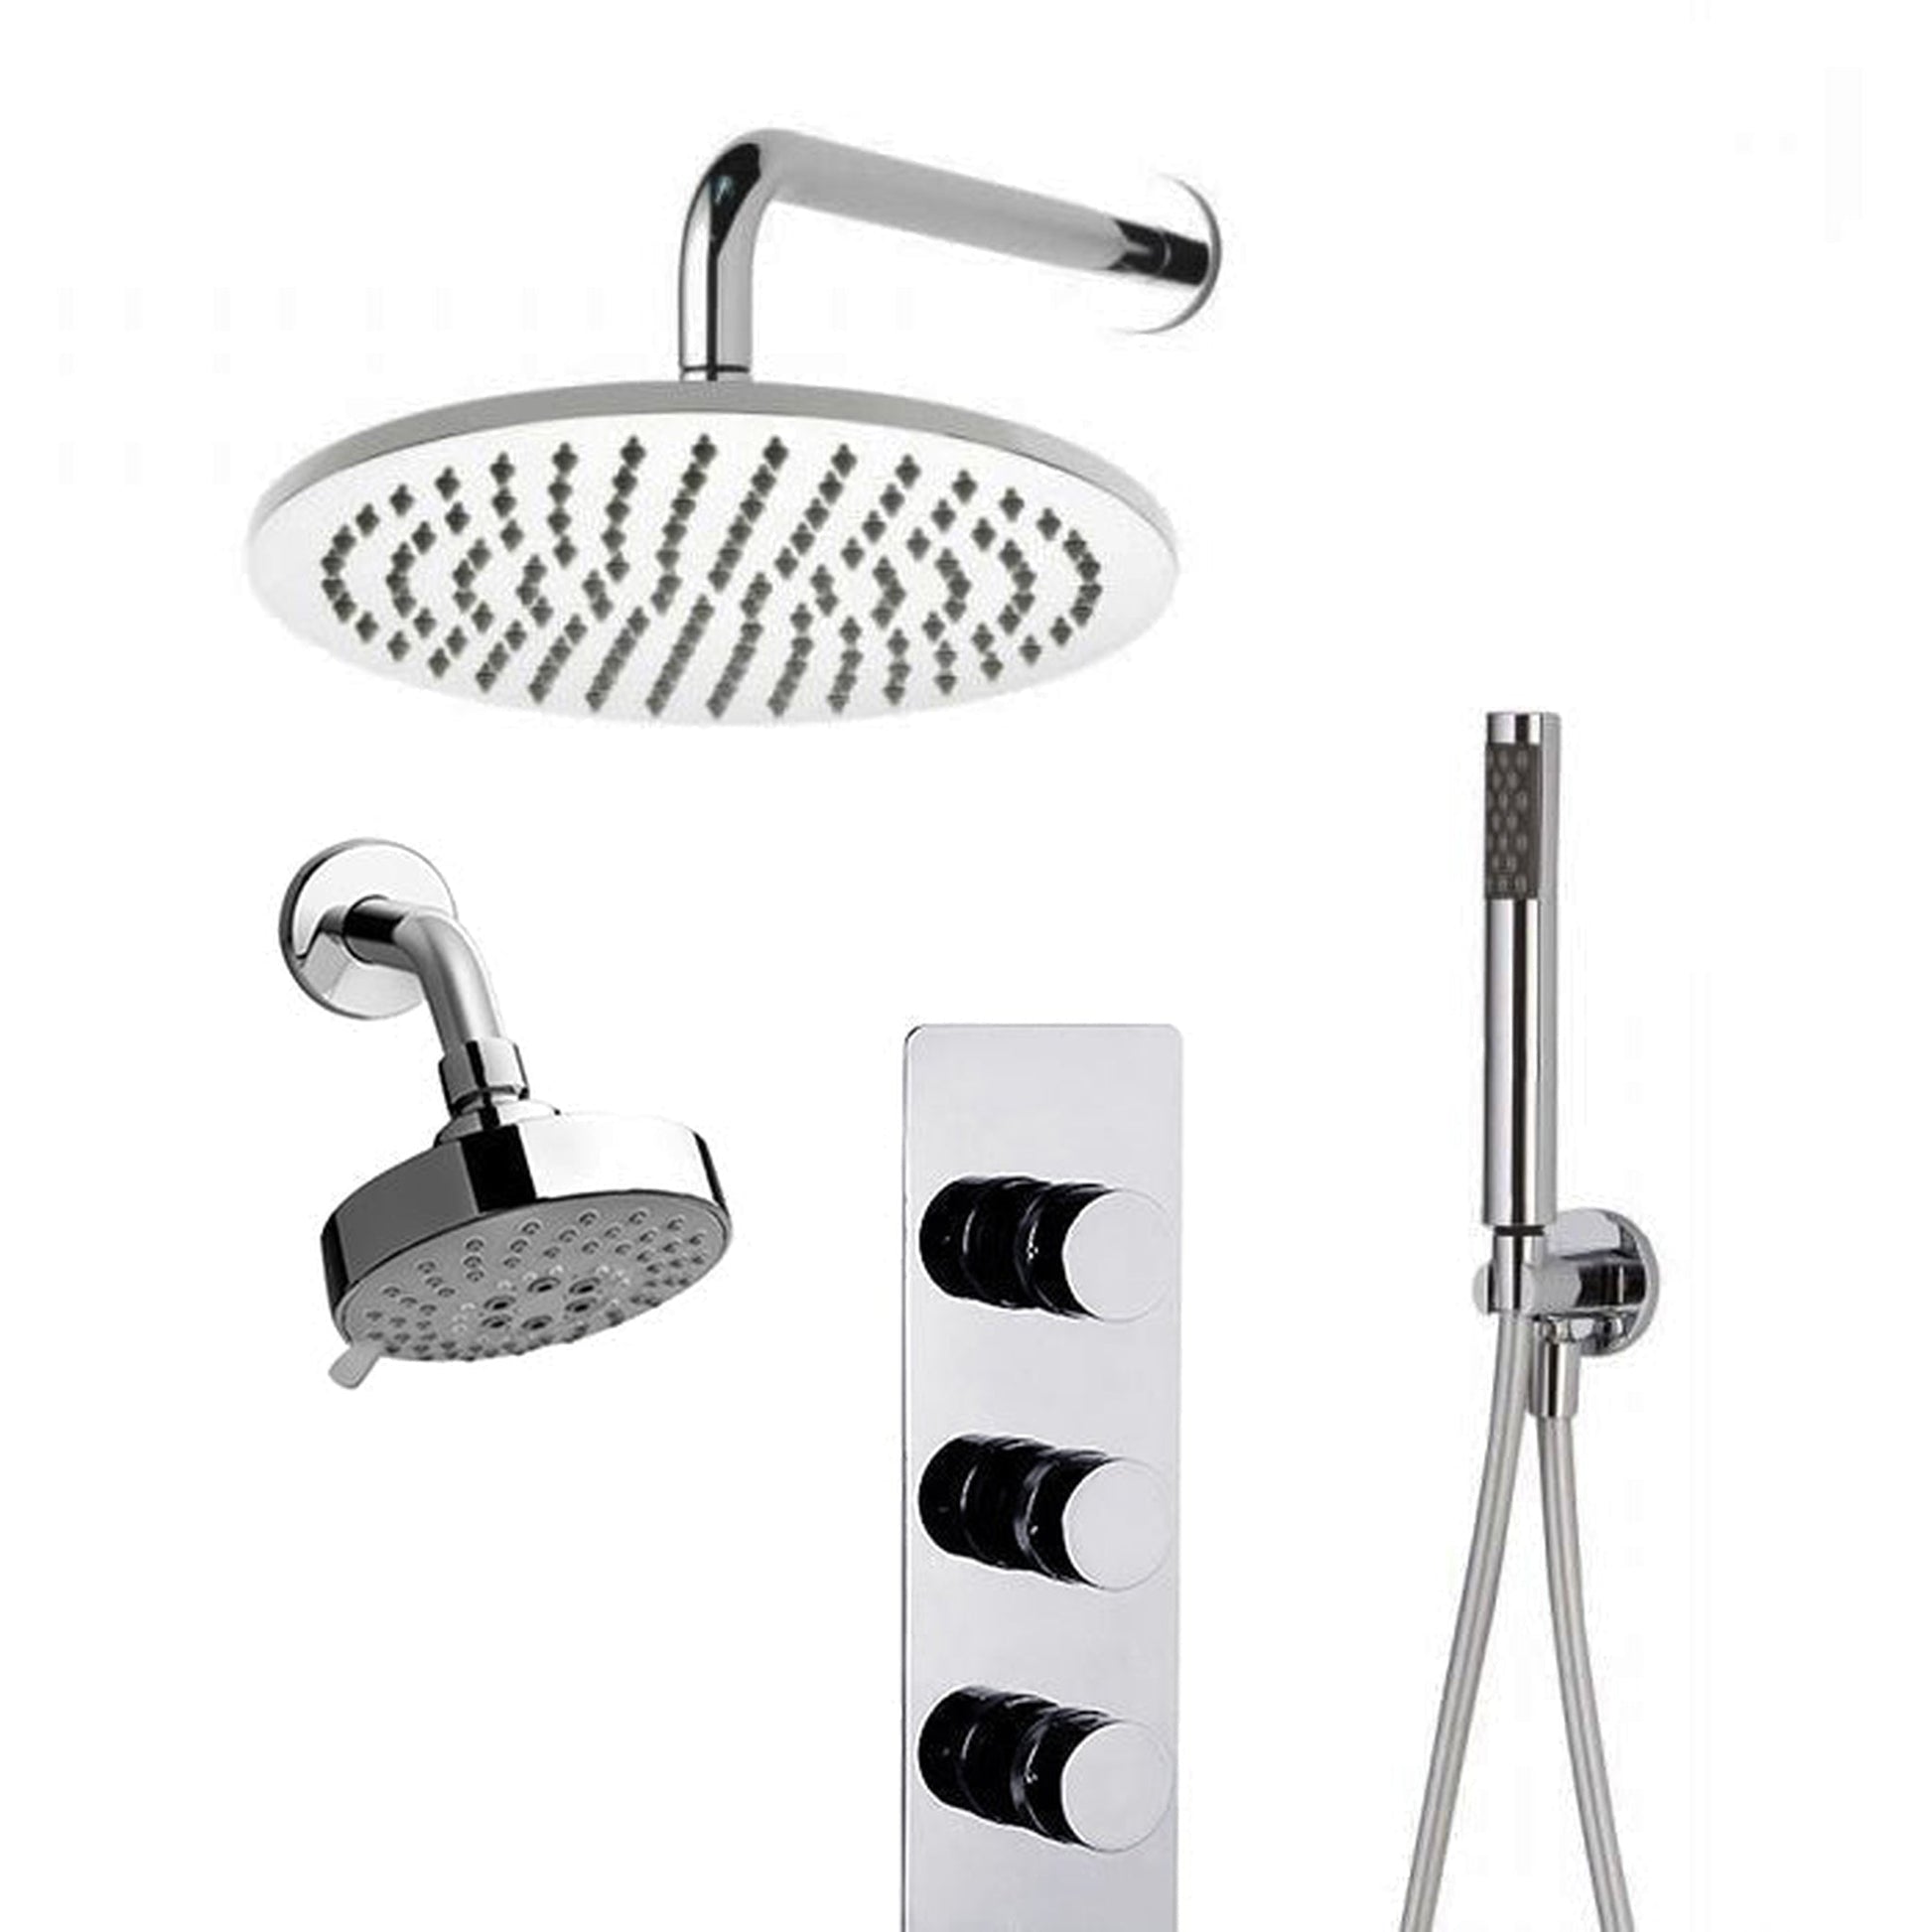 FontanaShowers Designers Creative Luxury 24" Chrome Round Wall-Mounted Dual Shower Head Rainfall Shower System With Hand Shower and Triple Handle Mixer